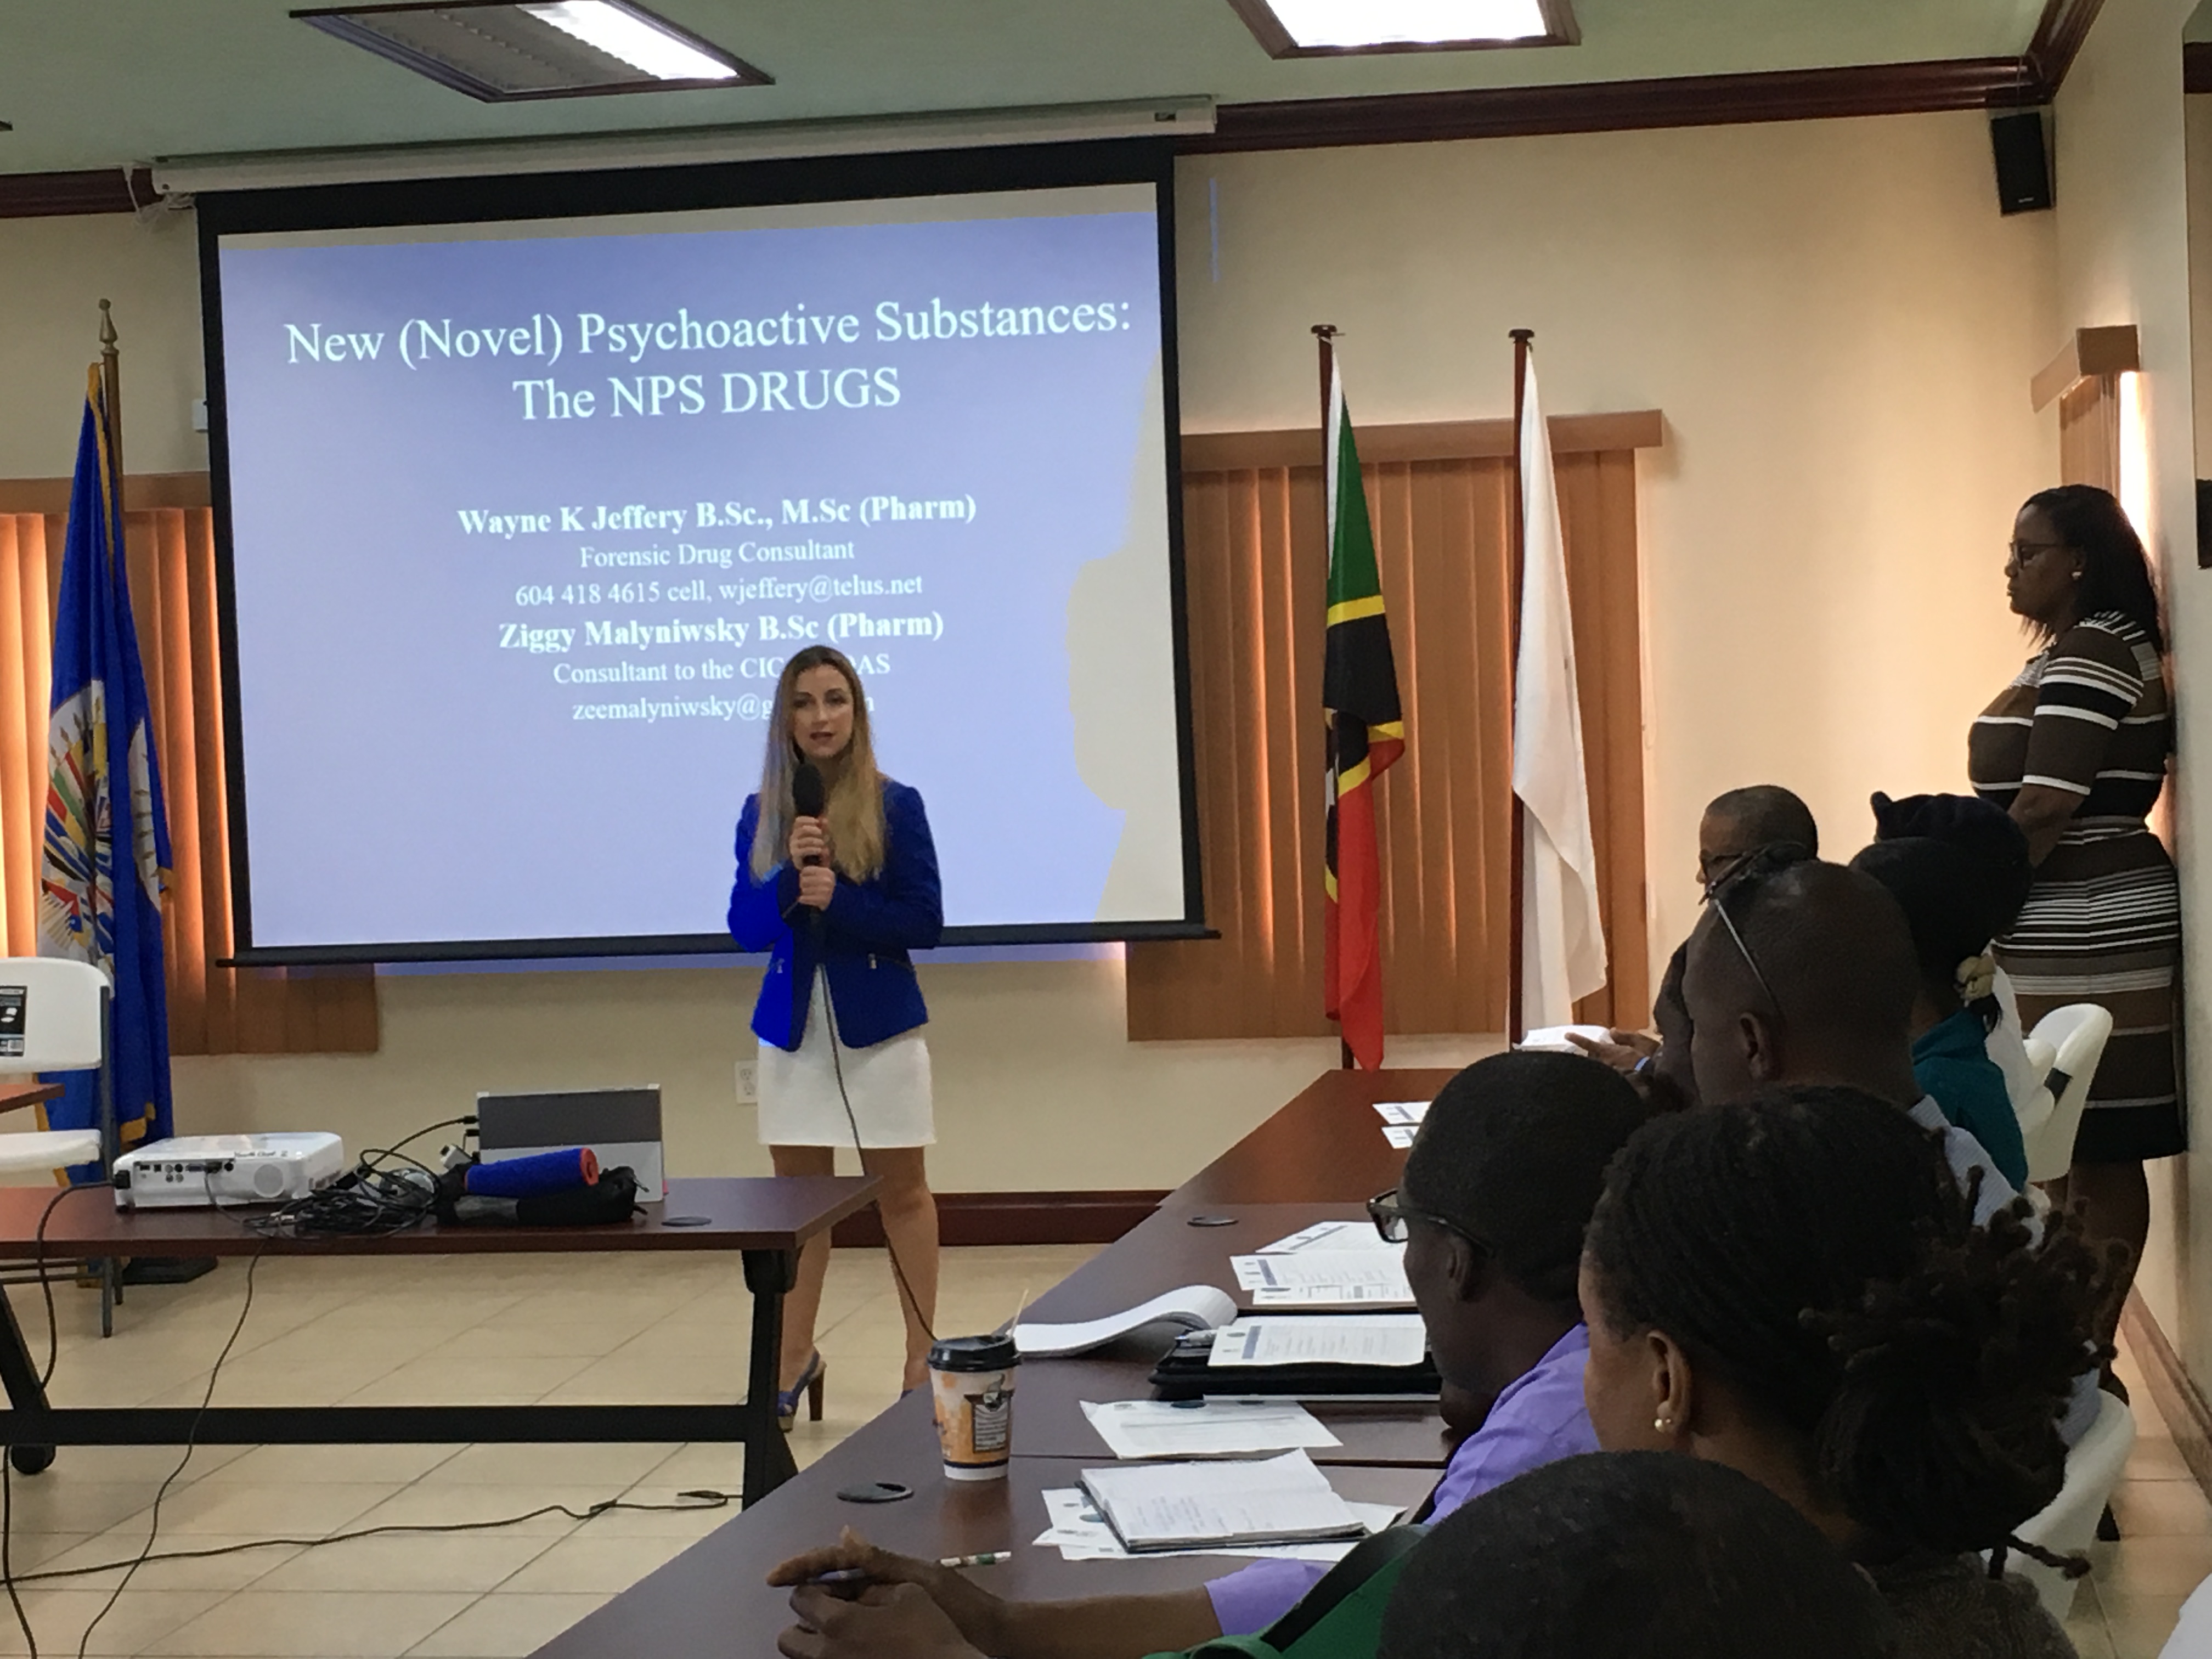 OAS/CICAD Seminar on the Control of Chemicals Used In The Producation Of Illicit Drugs and Synthetic Drugs held in St Kitts and Nevis - April 3-5, 2018(April 11, 2018)